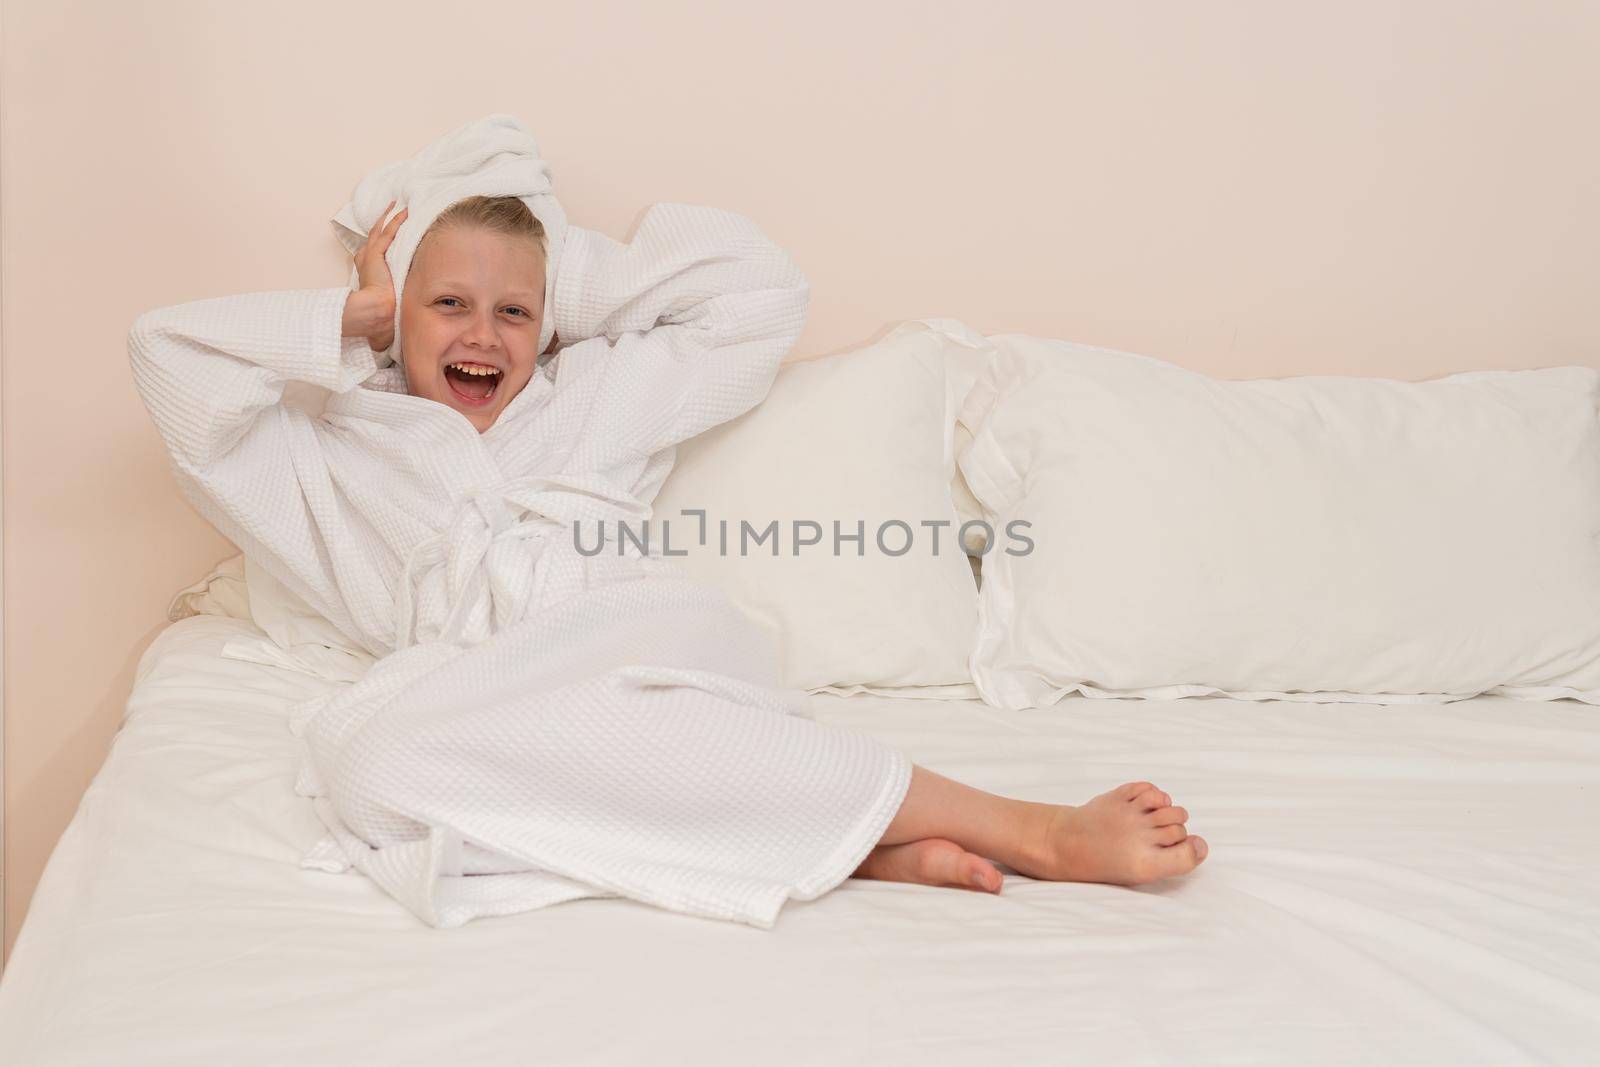 Head bathrobe Creek smile copyspace bed girl white hygiene people, for lifestyle hotel from beautiful and person spa, towel care. Face kid fashion,